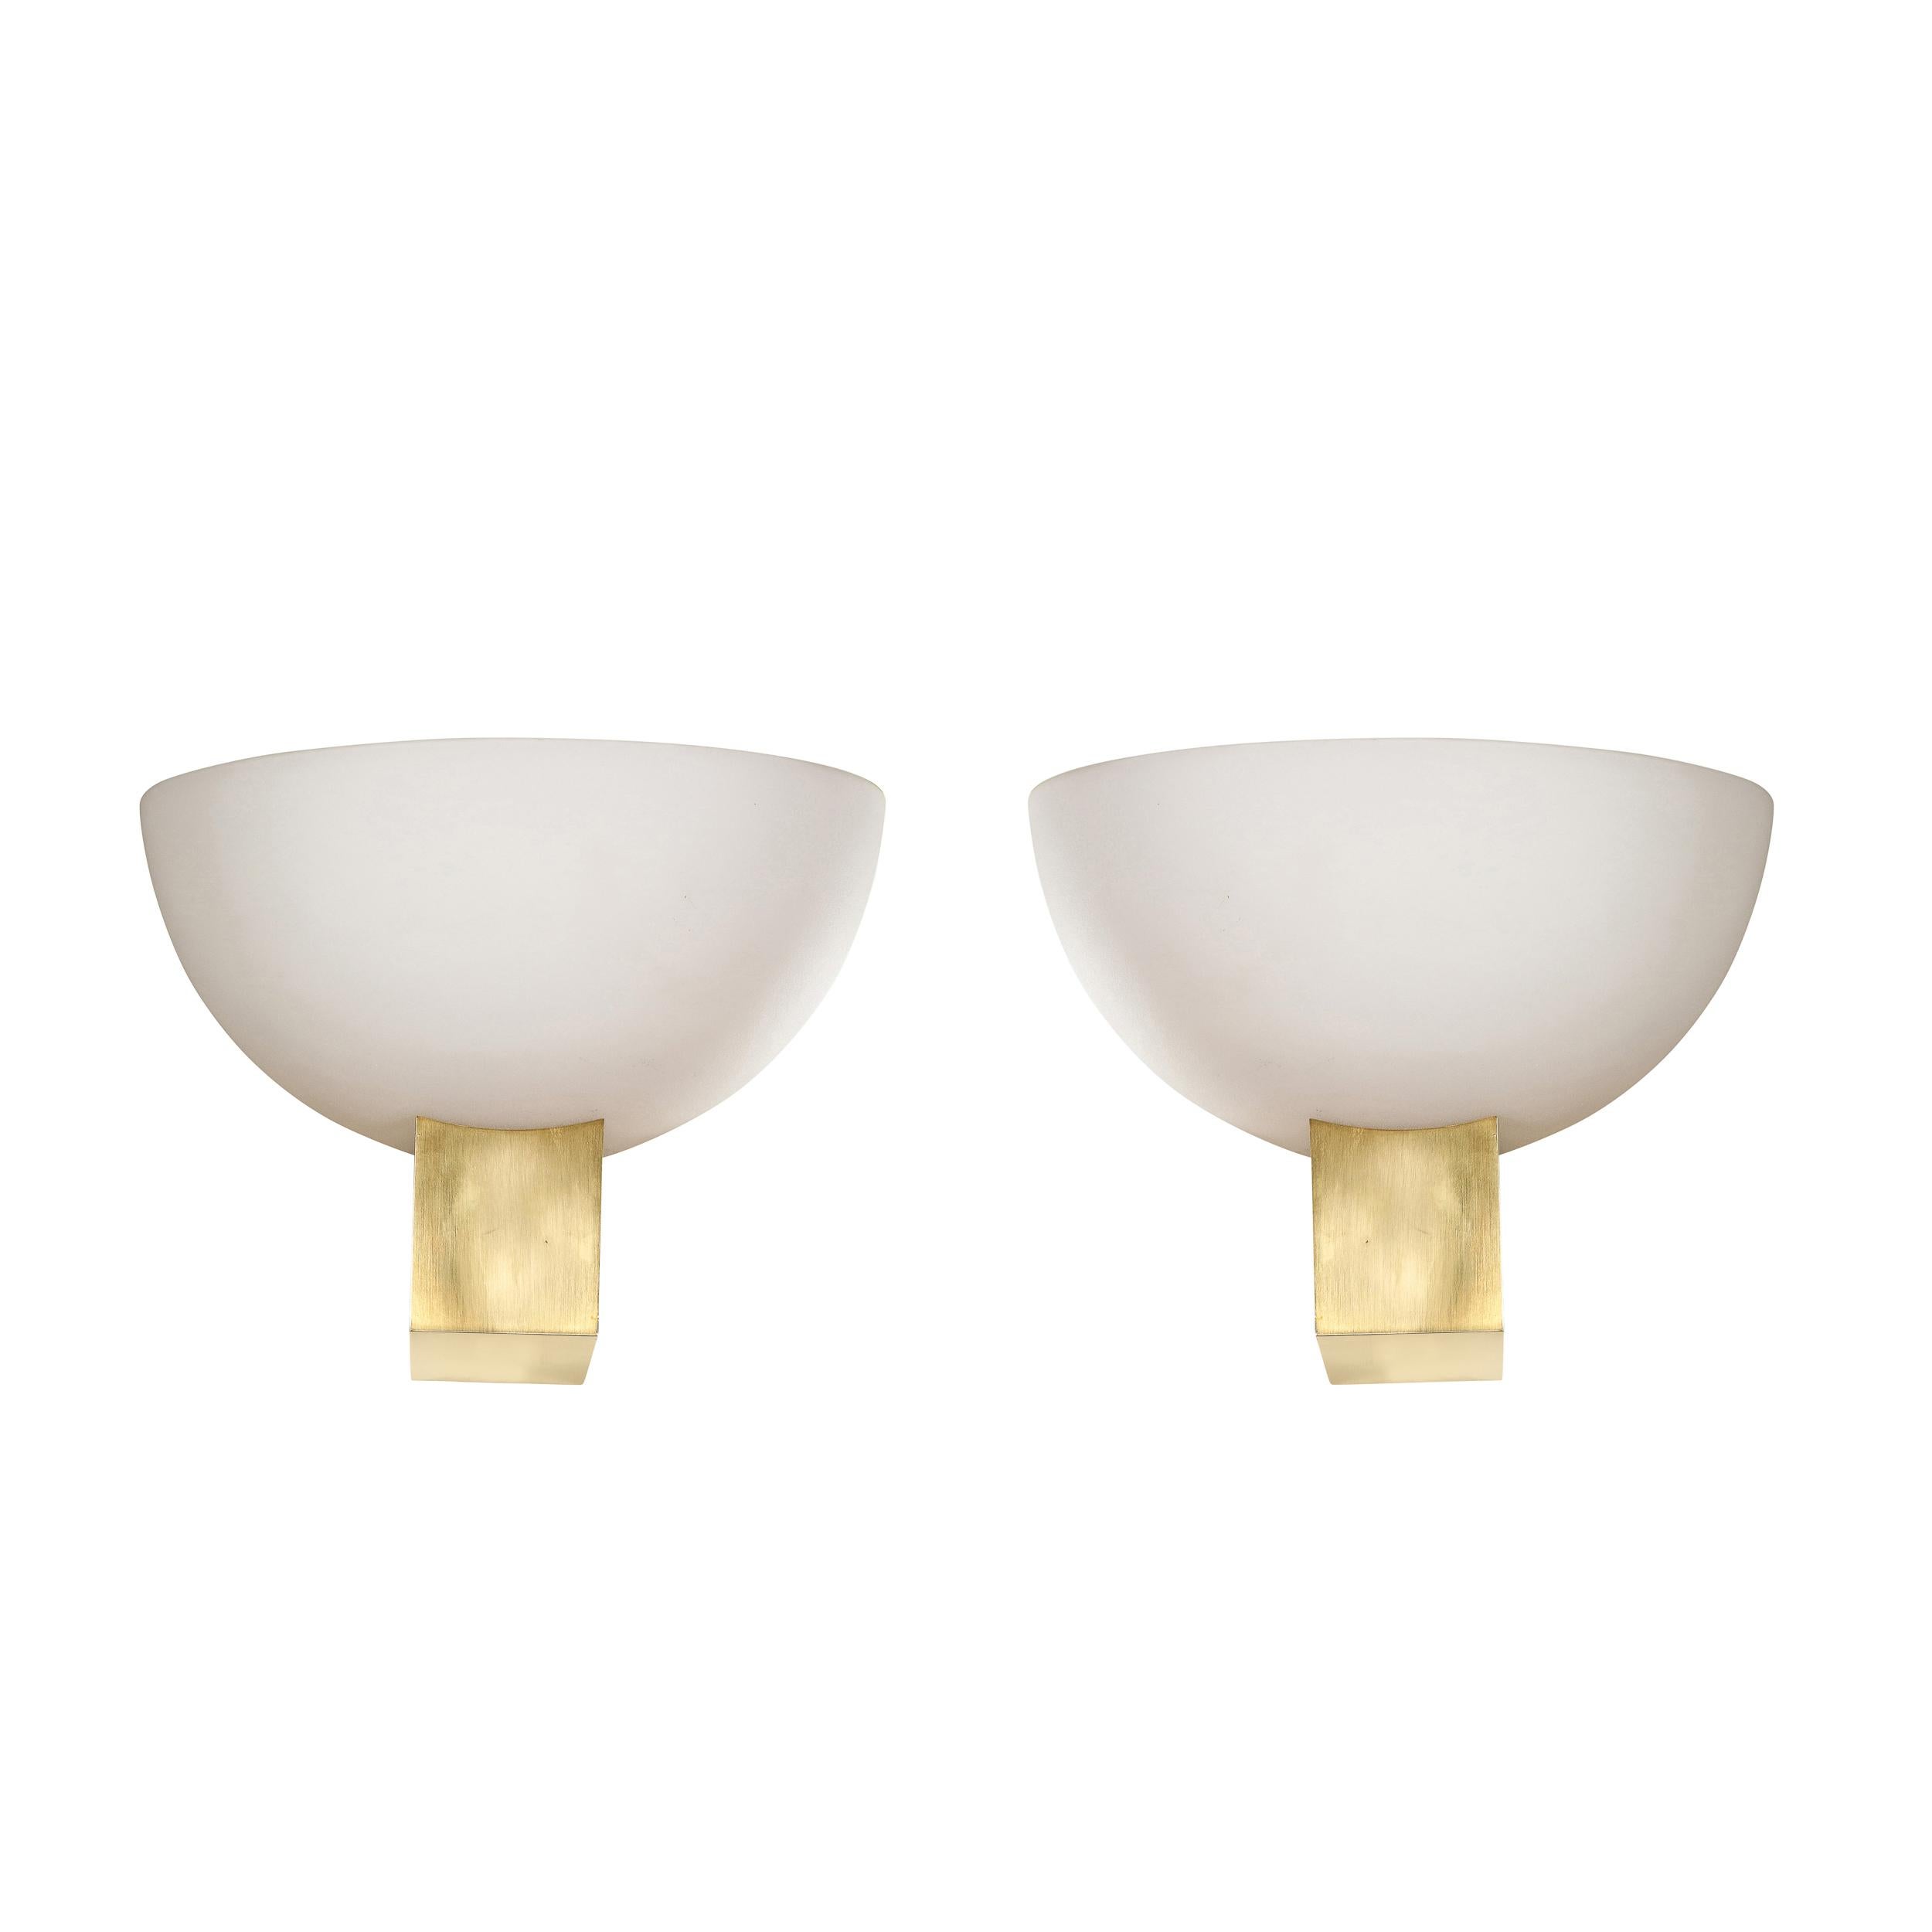 This refined pair of Art Deco brass and frosted glass reverse dome sconces were realized by the esteemed atelier of Jean Perzel in France circa 1940. They feature volumetric rectangular bodies in brass that dramatically cantilever out from the wall.